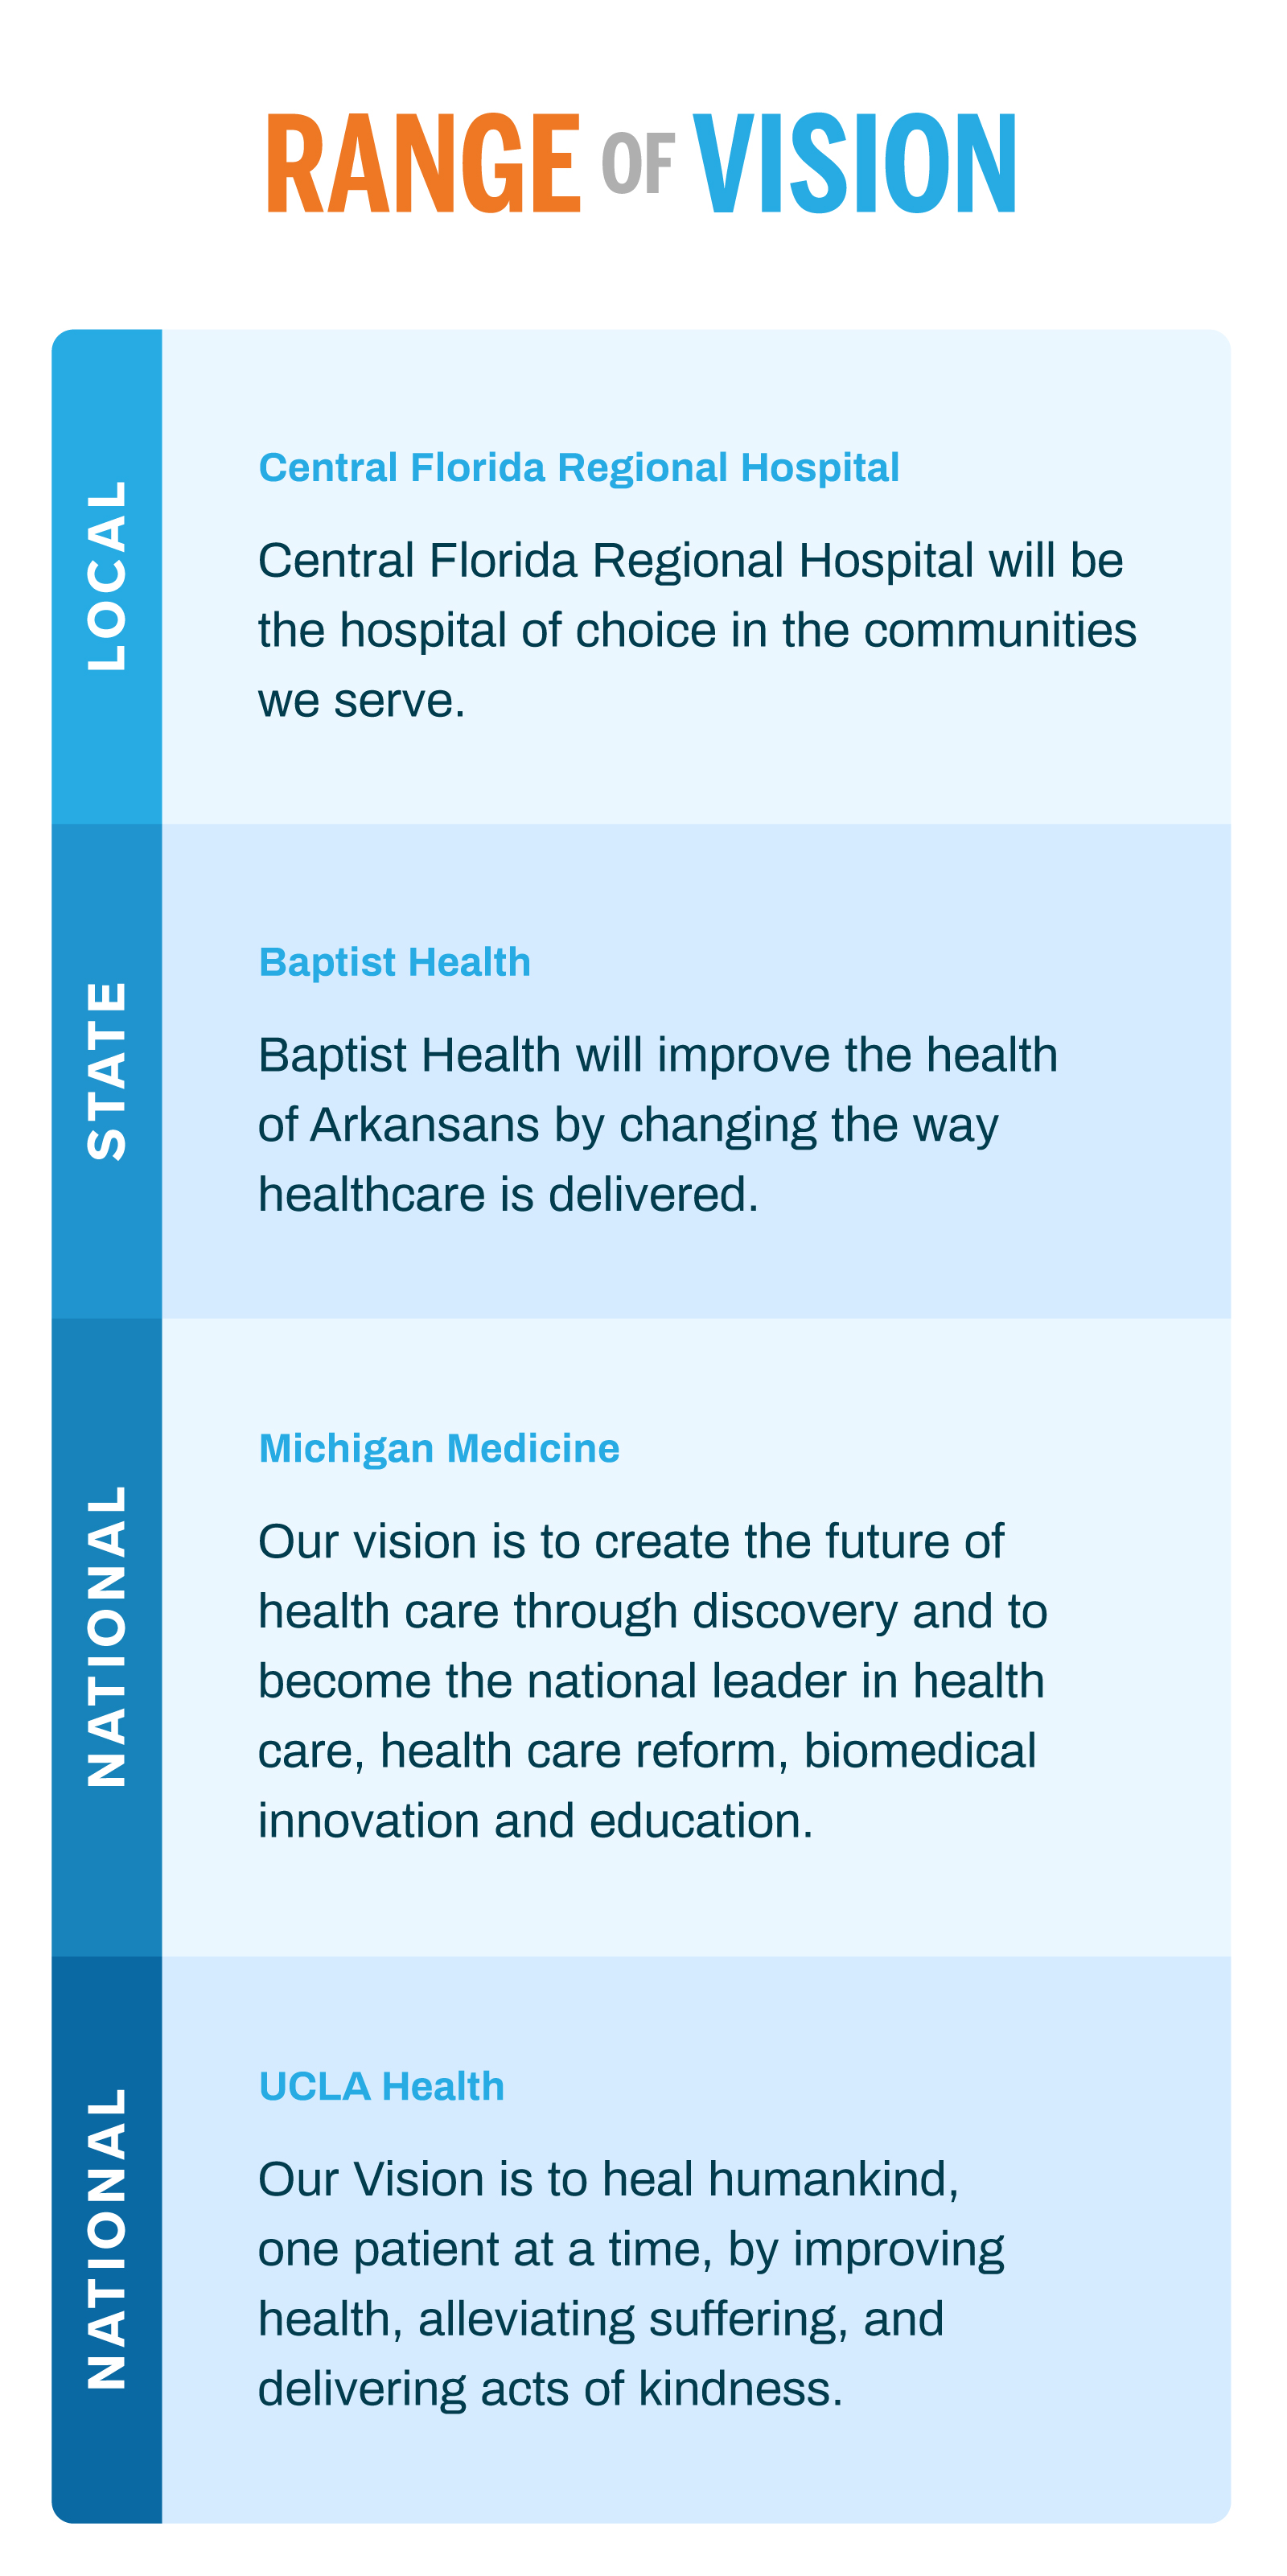 the range of visions in healthcare organizations